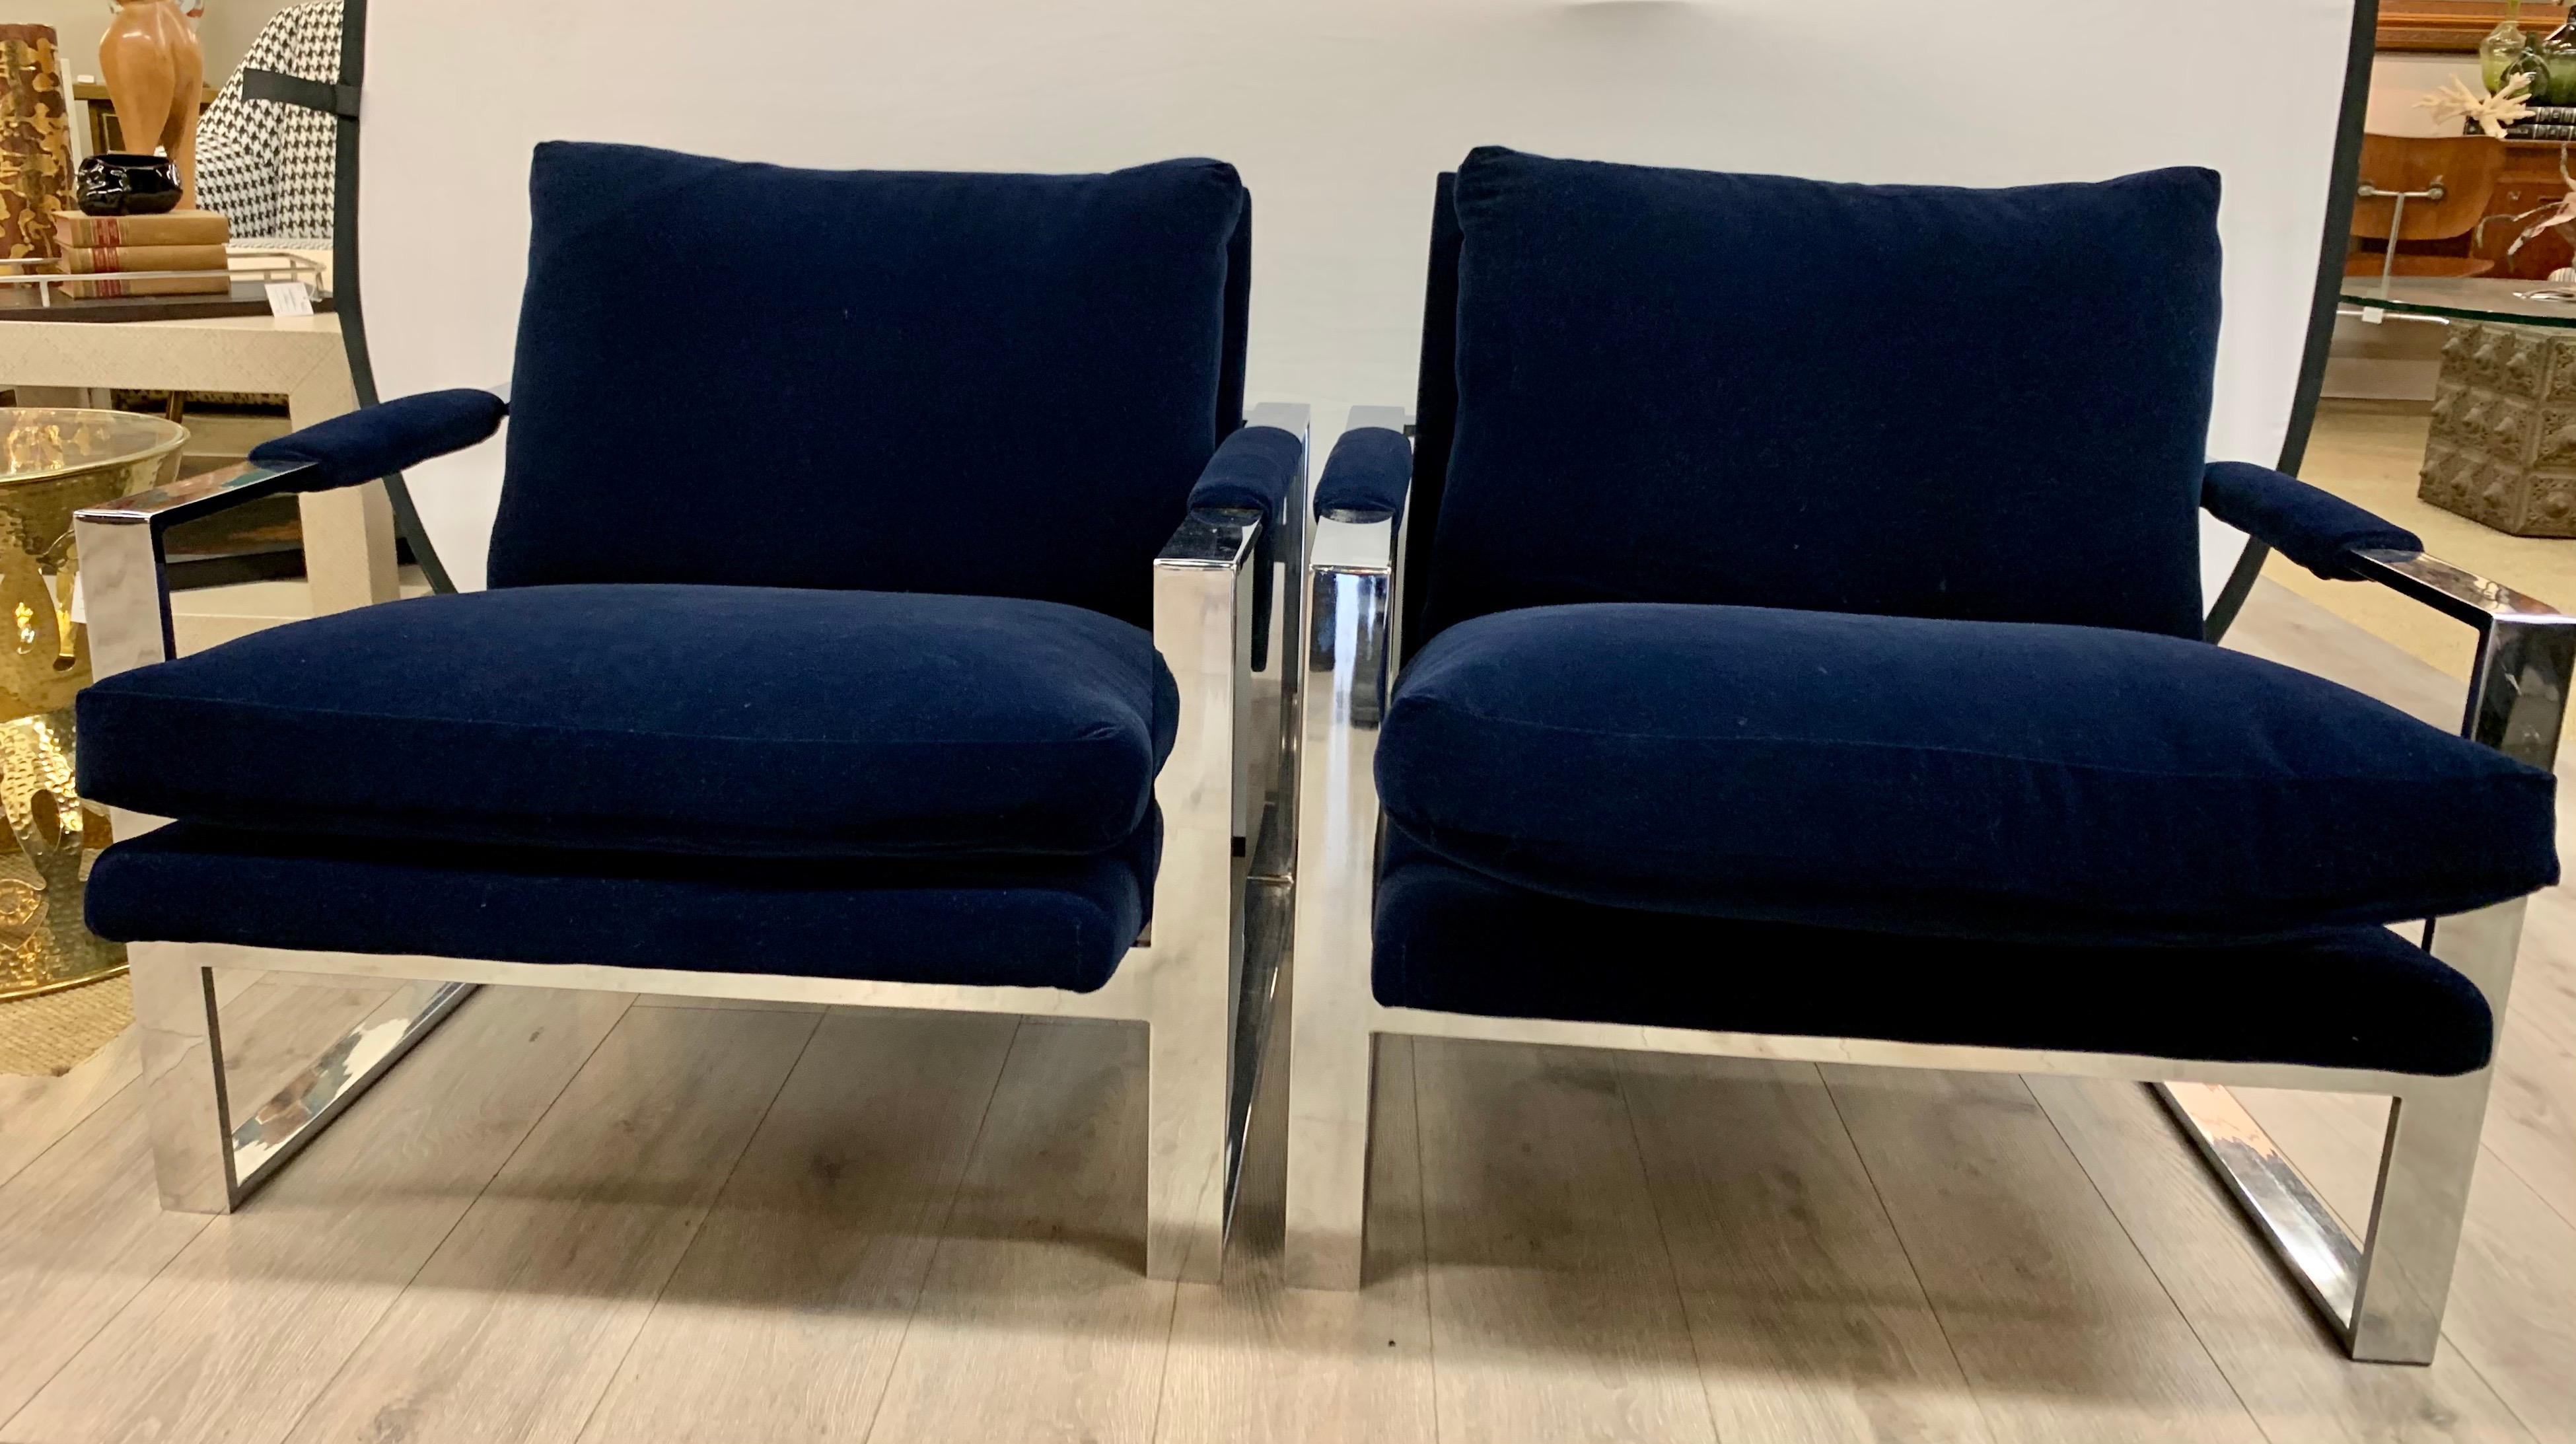 Newly upholstered in a luxurious solid navy velvet, this matching pair of mid century polished steel cube chairs are sure to impress. These chairs are heavy and have lines to die for. All dimensions are below. Now, more than ever, home is where the